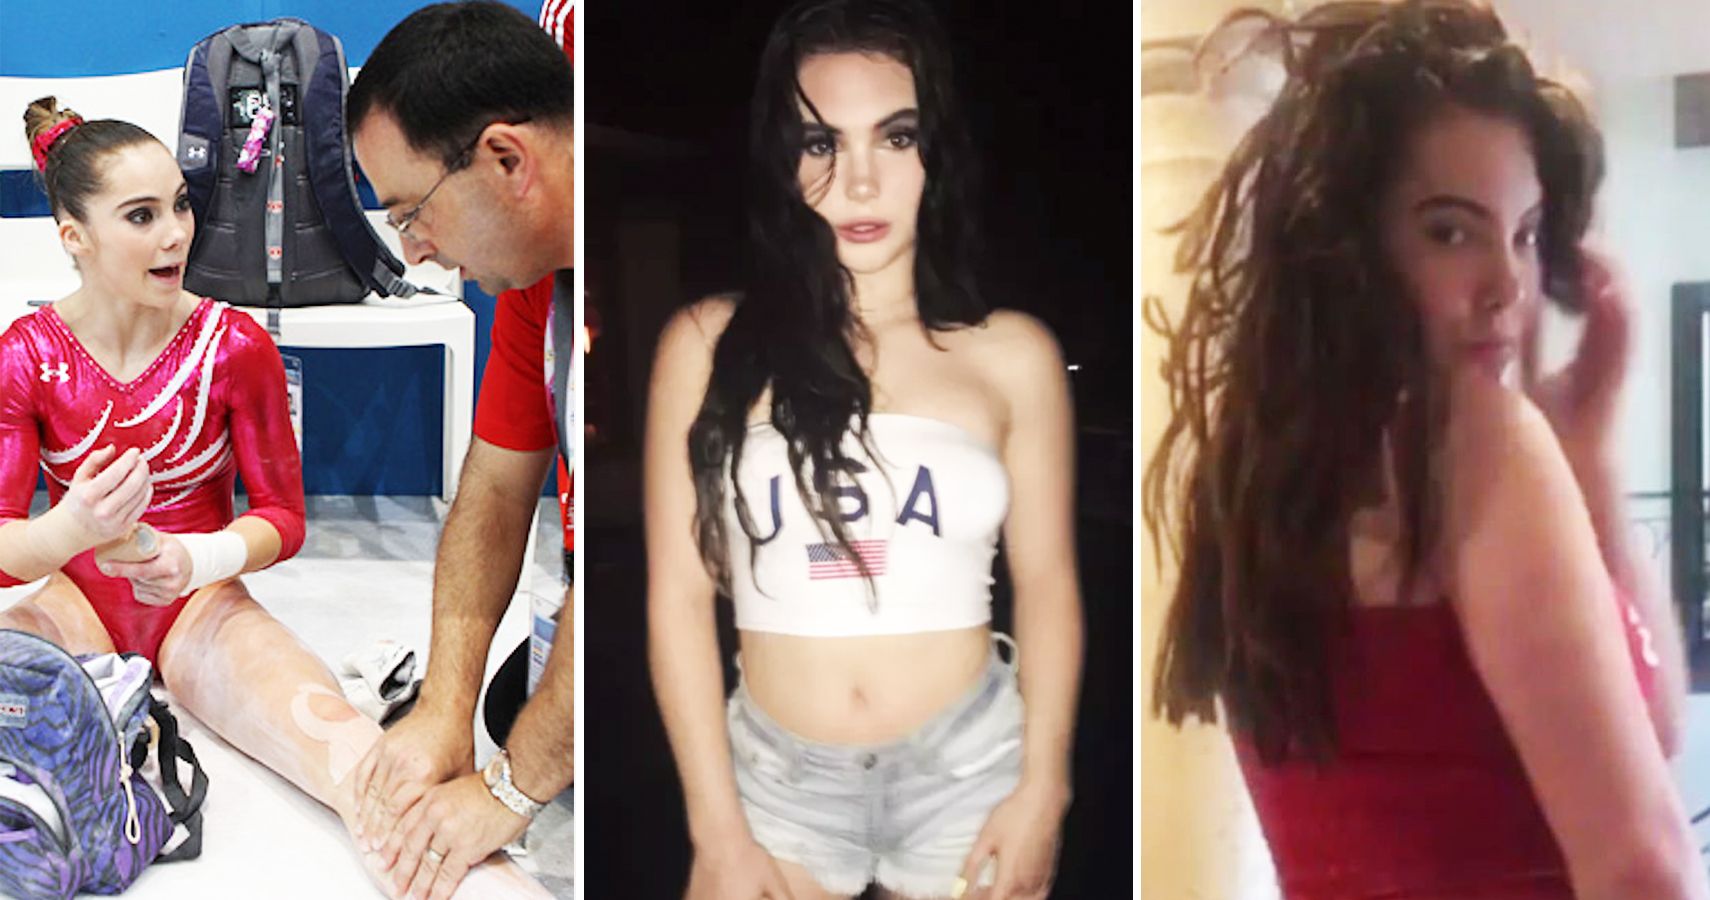 15 Photos That Prove McKayla Maroney Is Better Off Without USA Gymnastics.